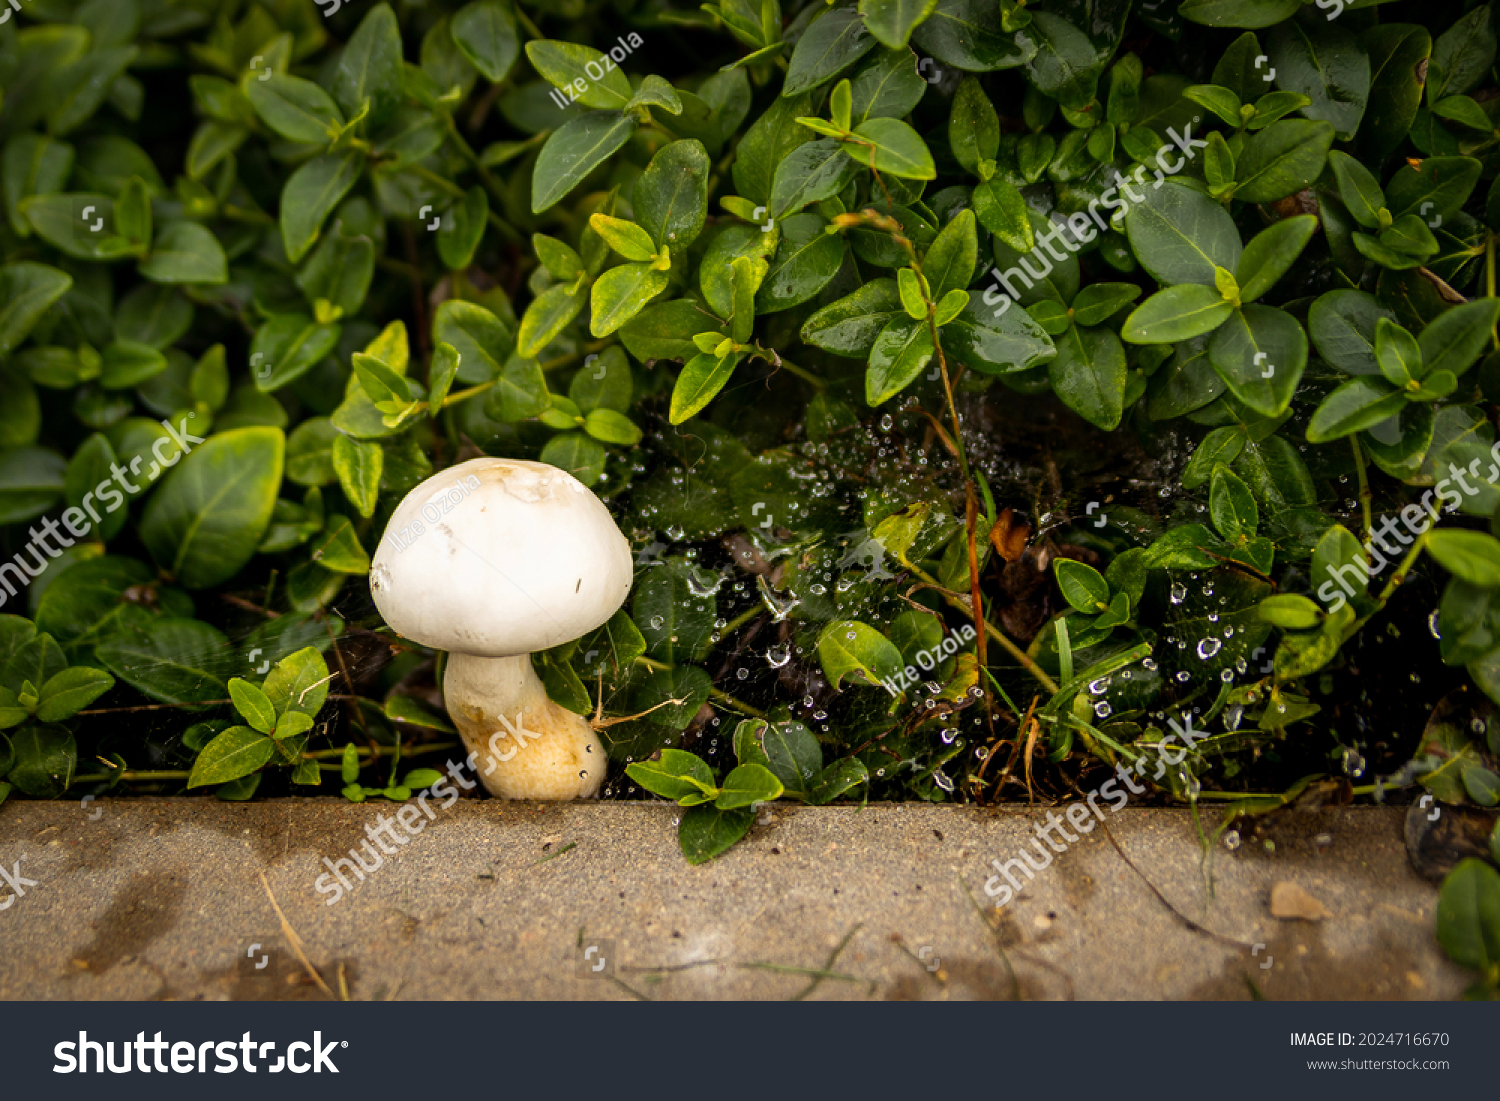 Close up landscape photography of Latvia fauna and flora with white wild mushroom in green backyard lawn. #2024716670